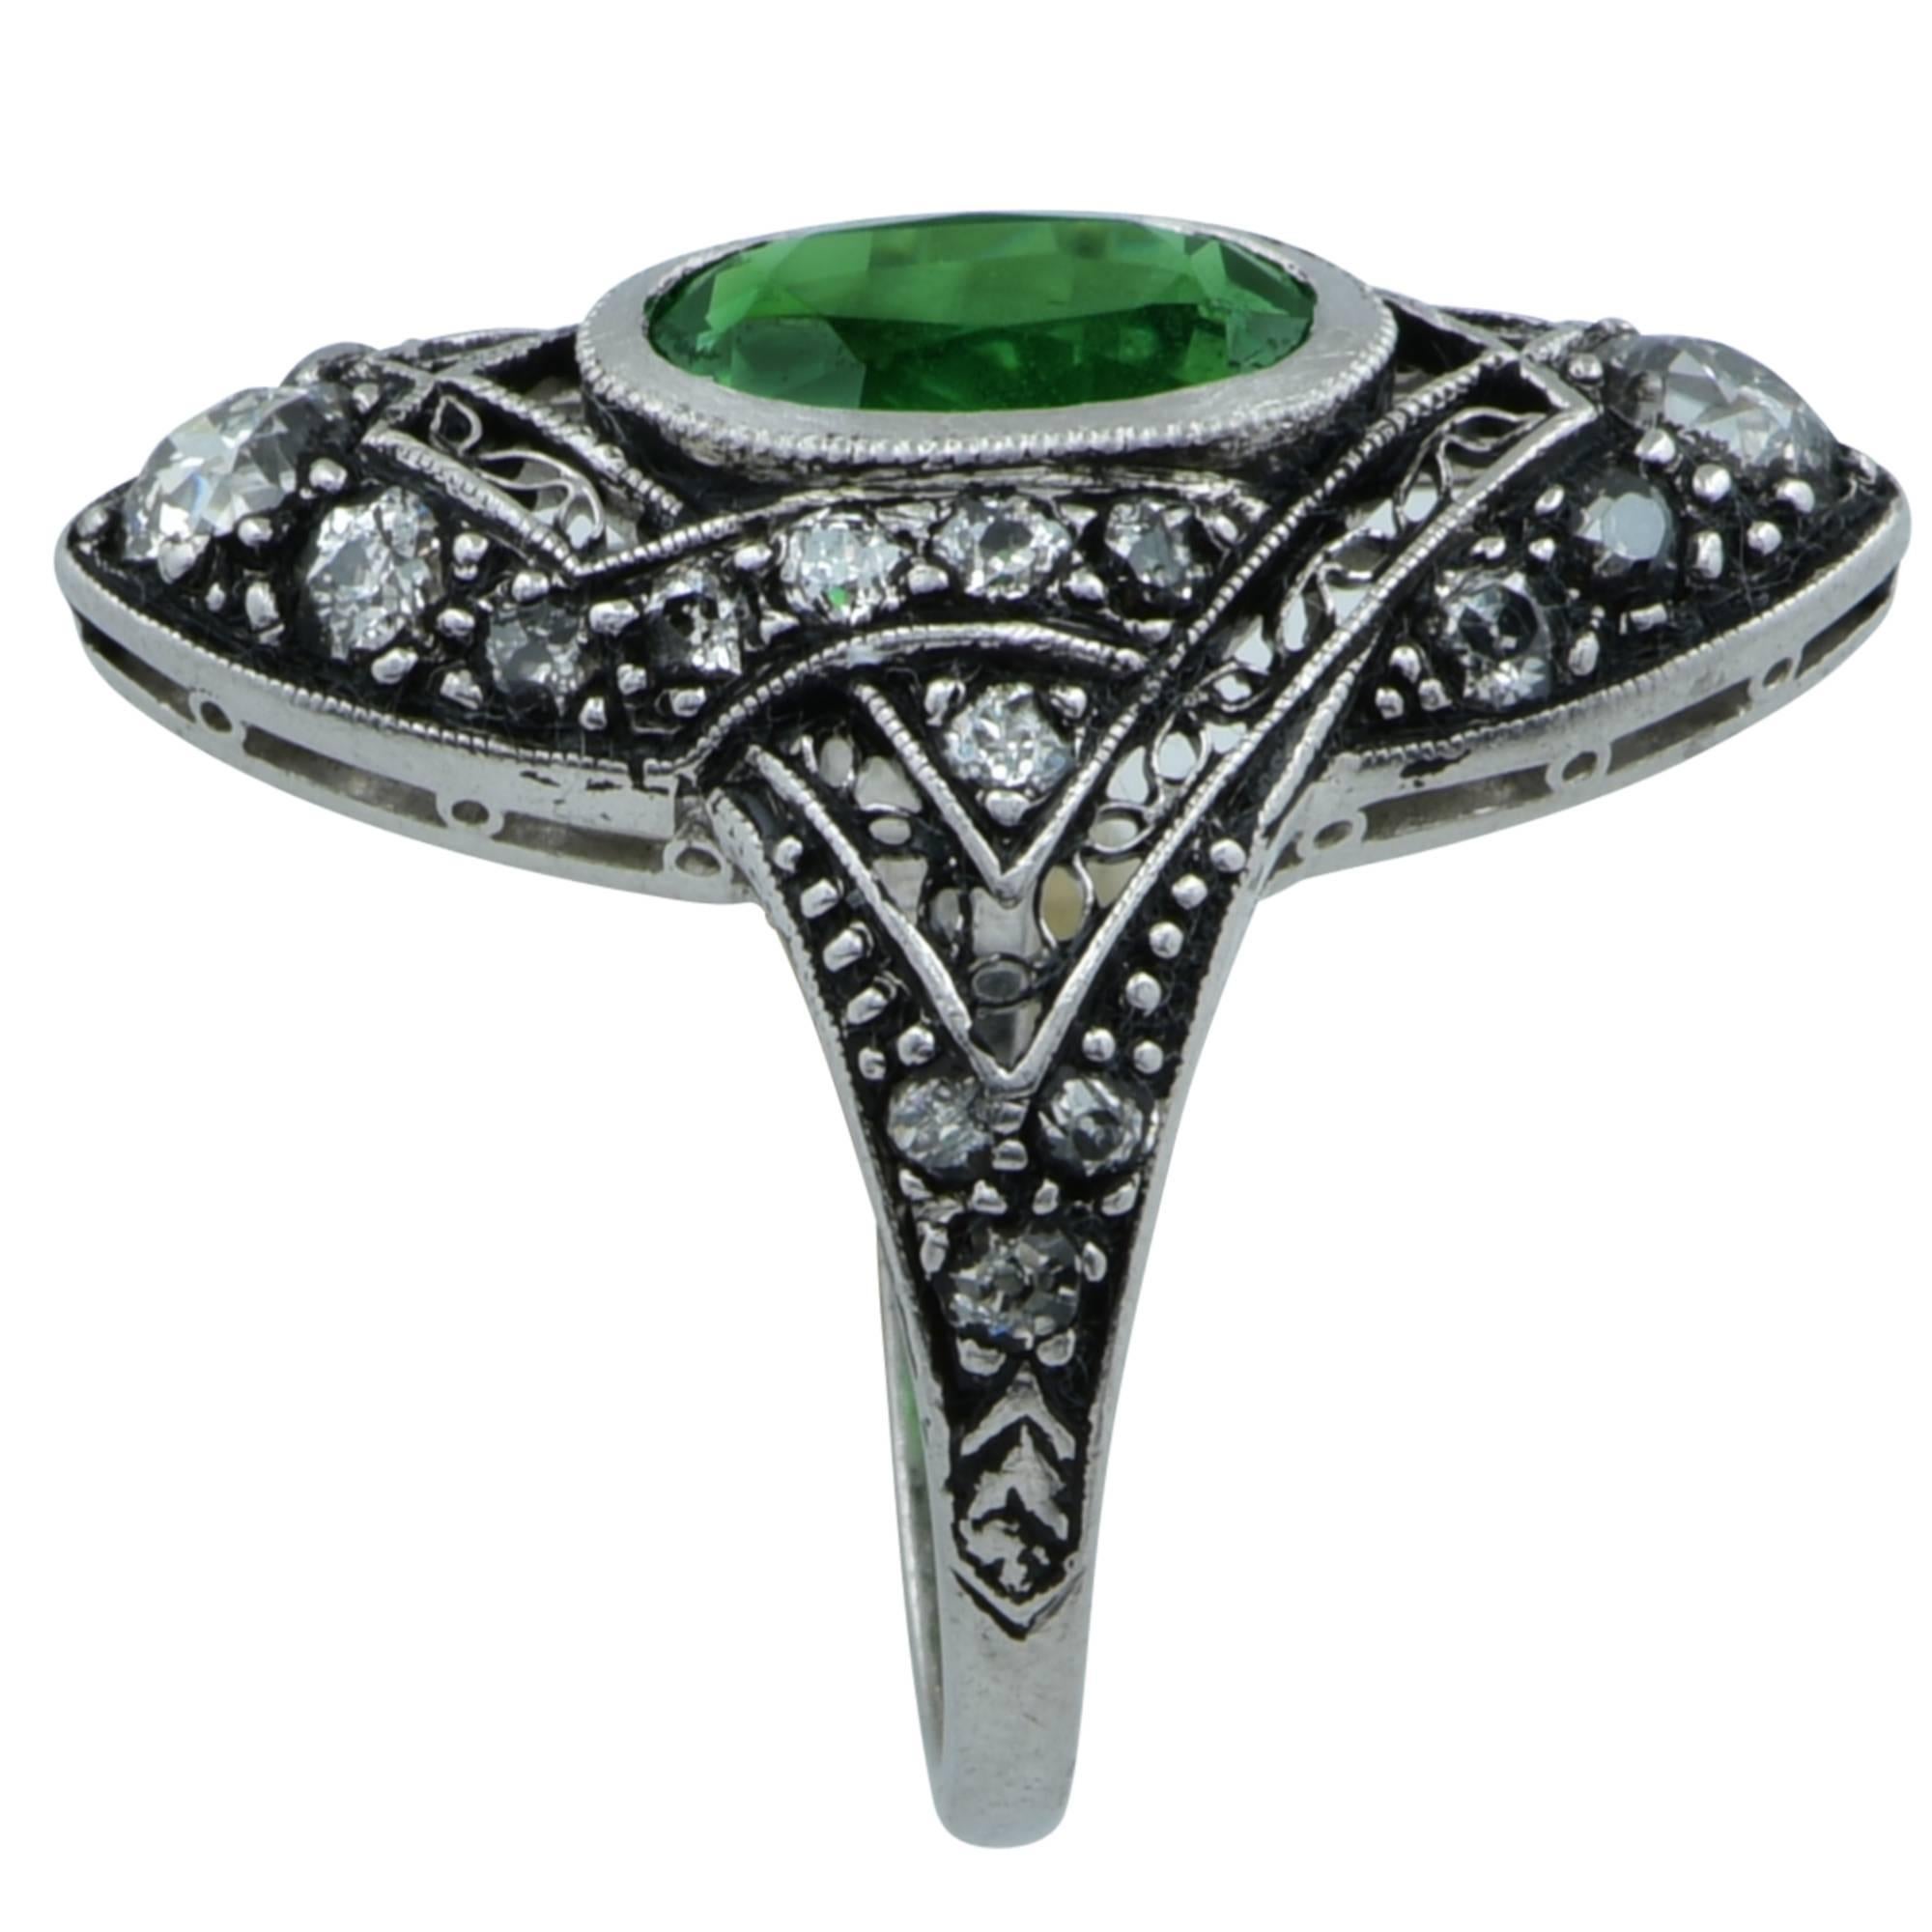 Art deco ring crafted in platinum featuring an oval cut 2.29ct rich green Tsavorite garnet accented by 24 European cut diamonds weighing approximately .50cts total, G color VS clarity.  This ring is currently a size 4.5 and can easily be sized. The